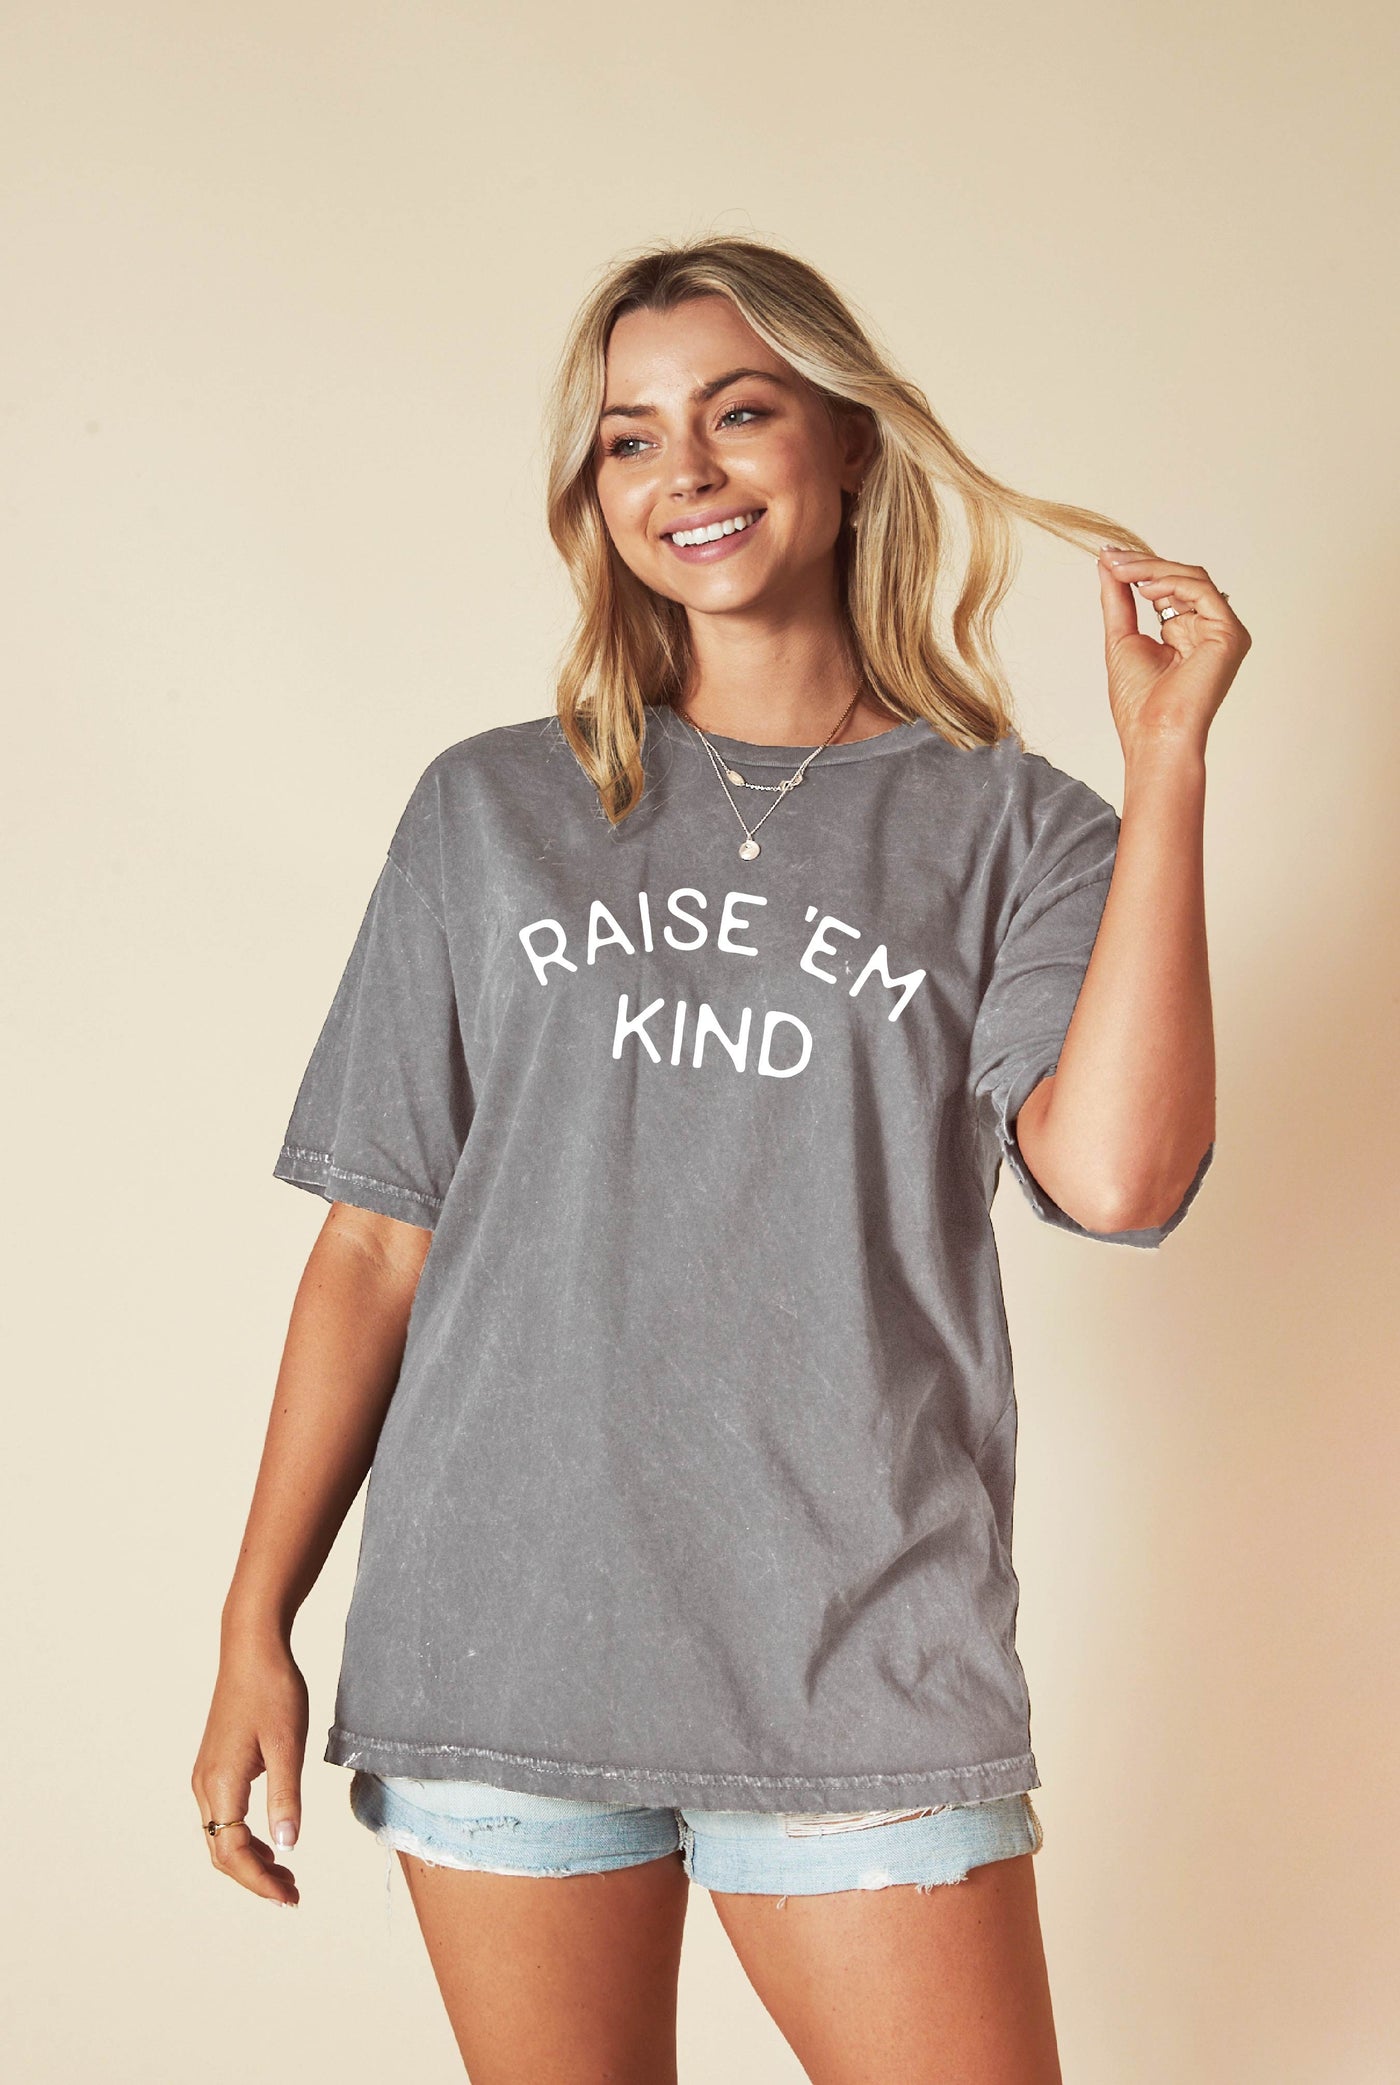 Raise 'Em Kind Mineral Oversized Graphic Top